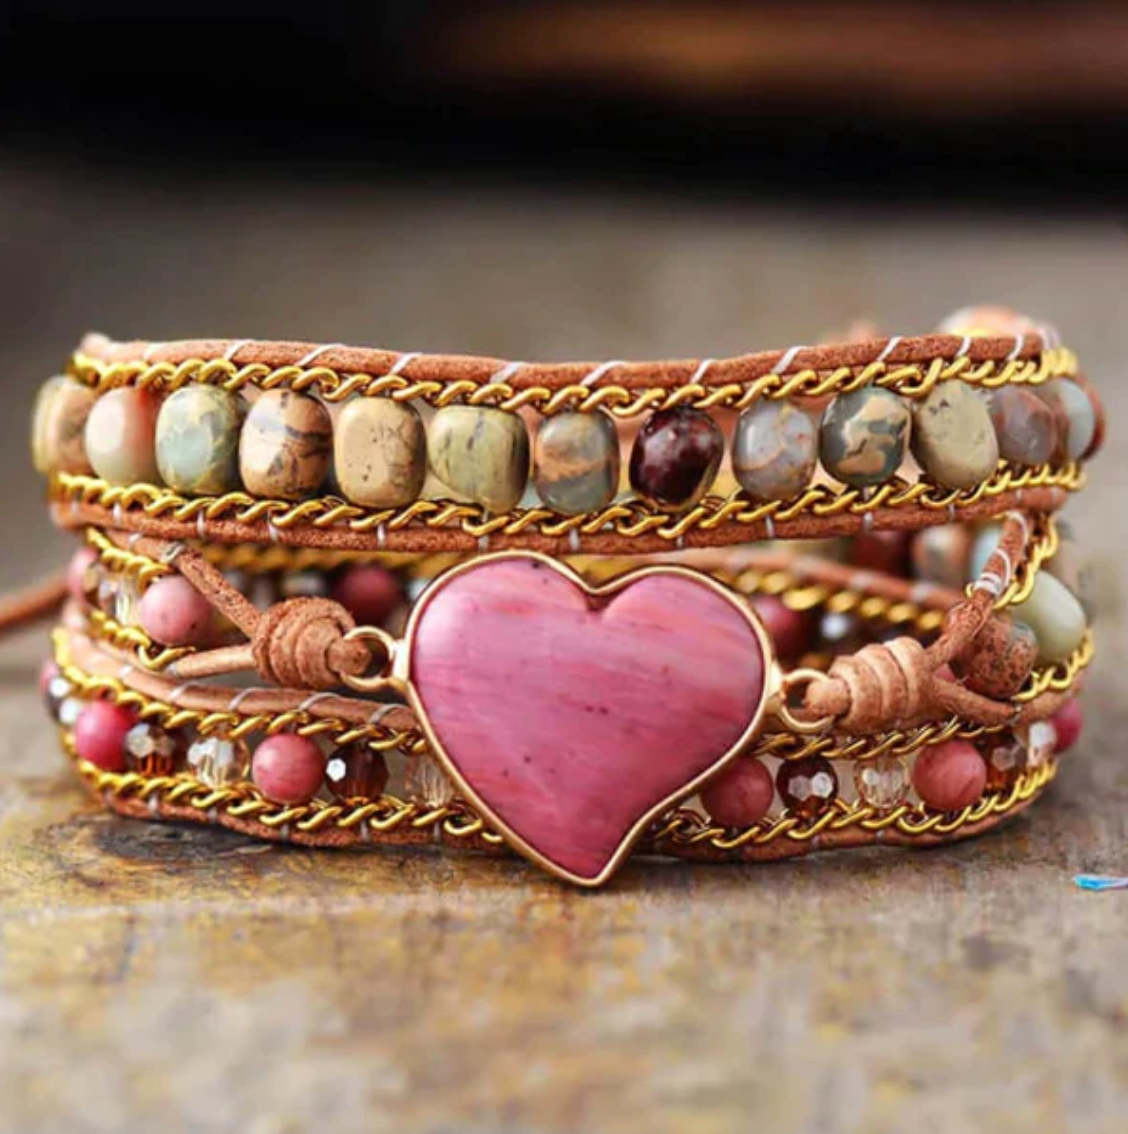 (60% OFF TODAY ONLY) TRUE LOVE'S HEART WRAP